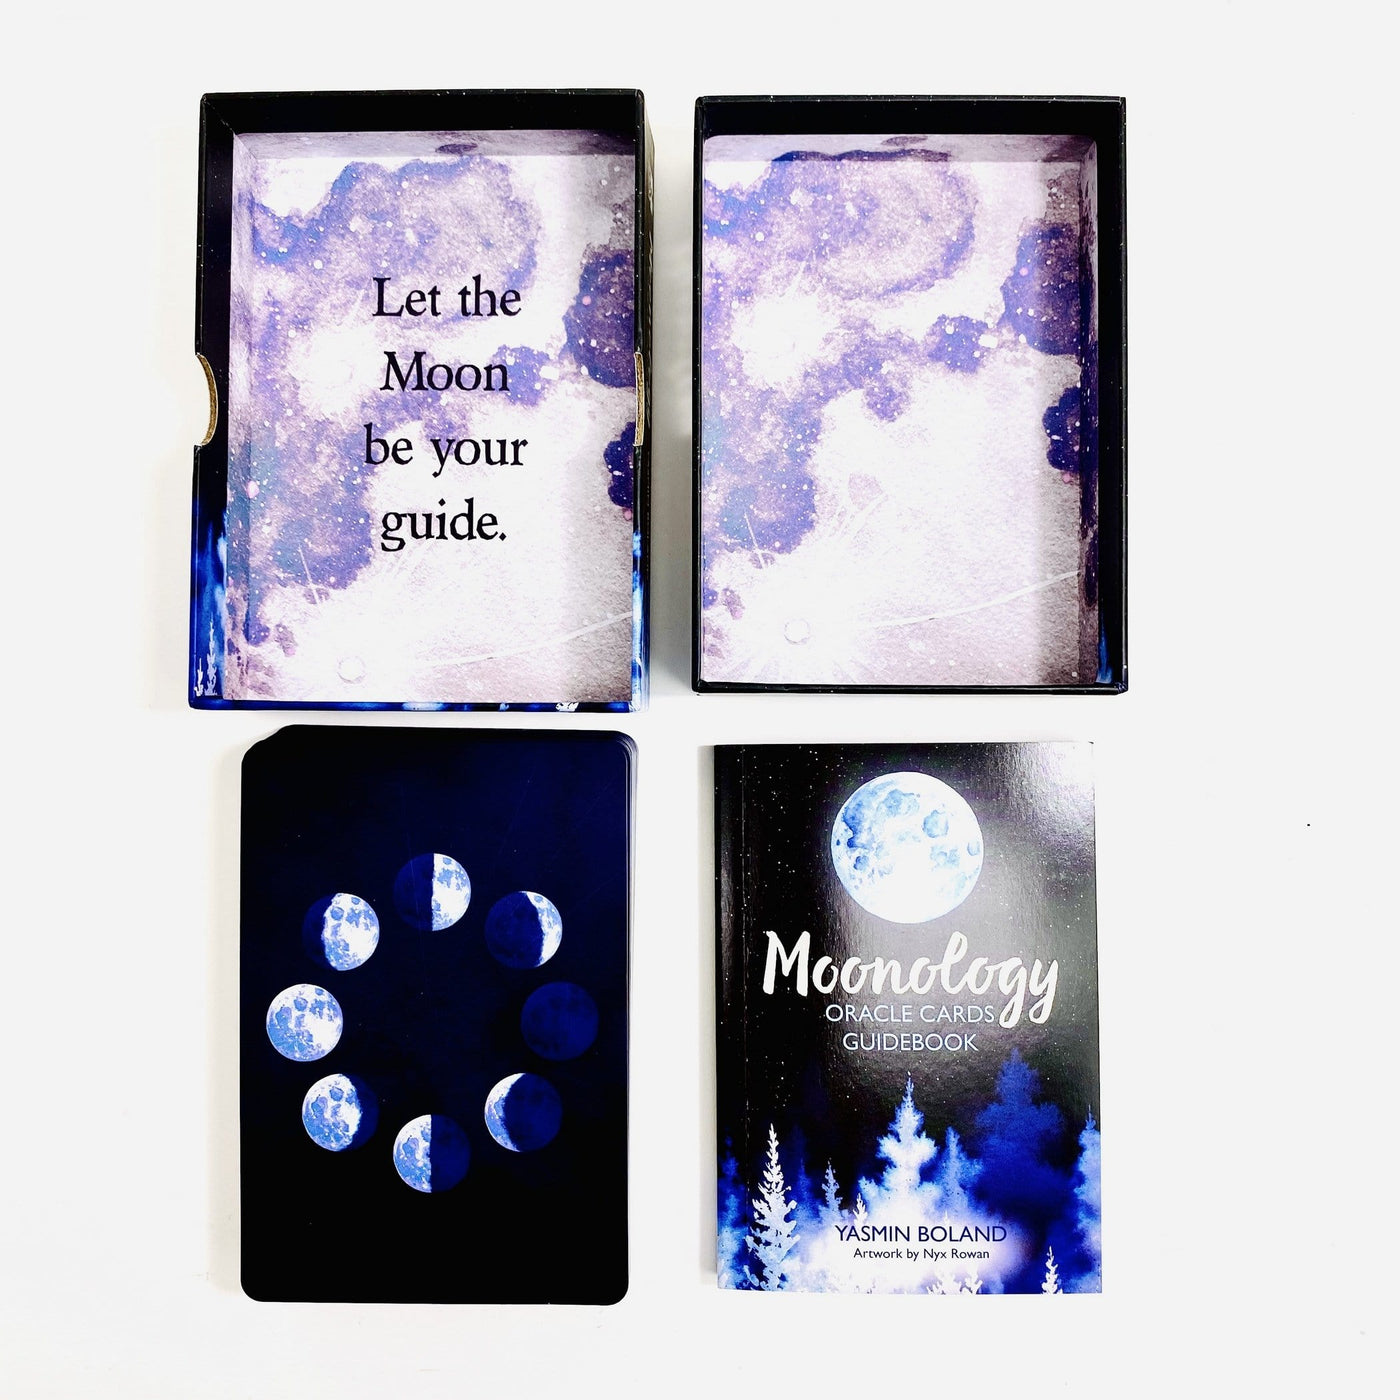 Moonology Oracle Cards Deck Open box, with cards book and box on display 